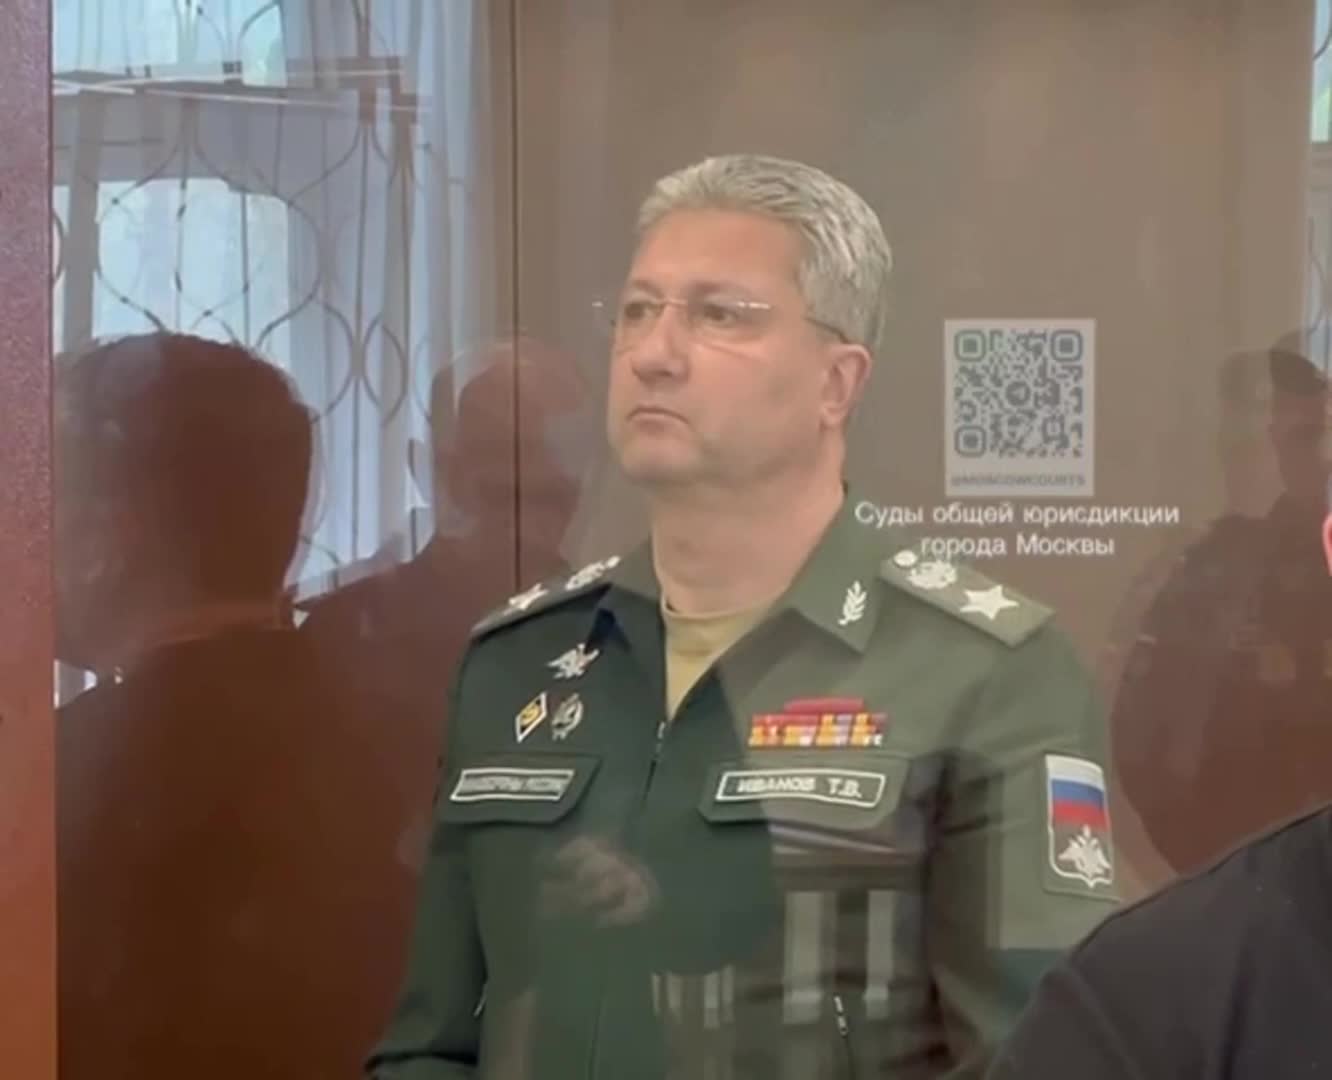 Timur and his team: what did the Deputy Minister of Defense burn on?